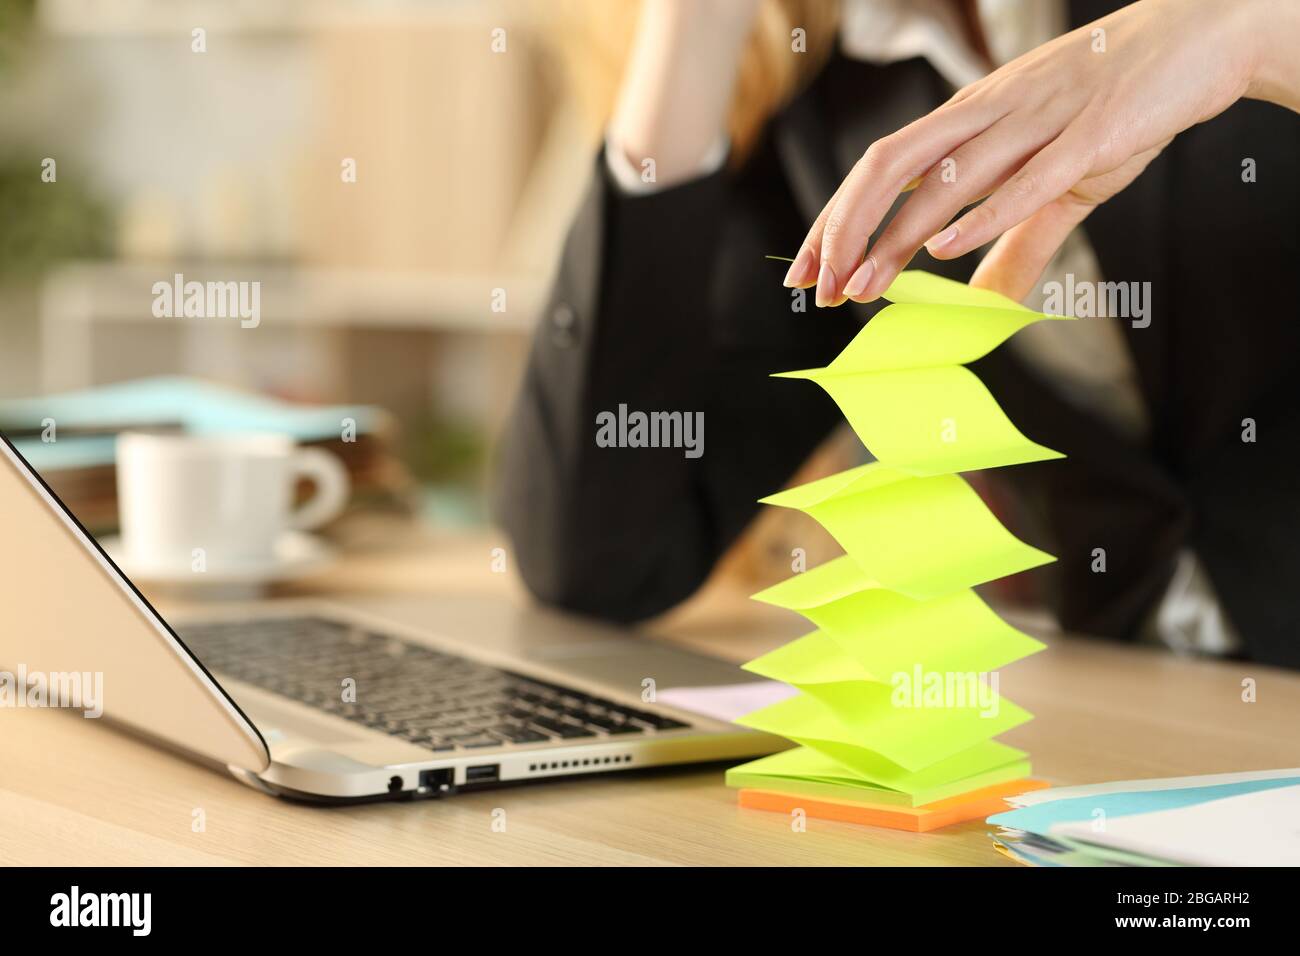 Bored lazy entrepreneur woman hands wasting time with post notes sitting on a desk Stock Photo